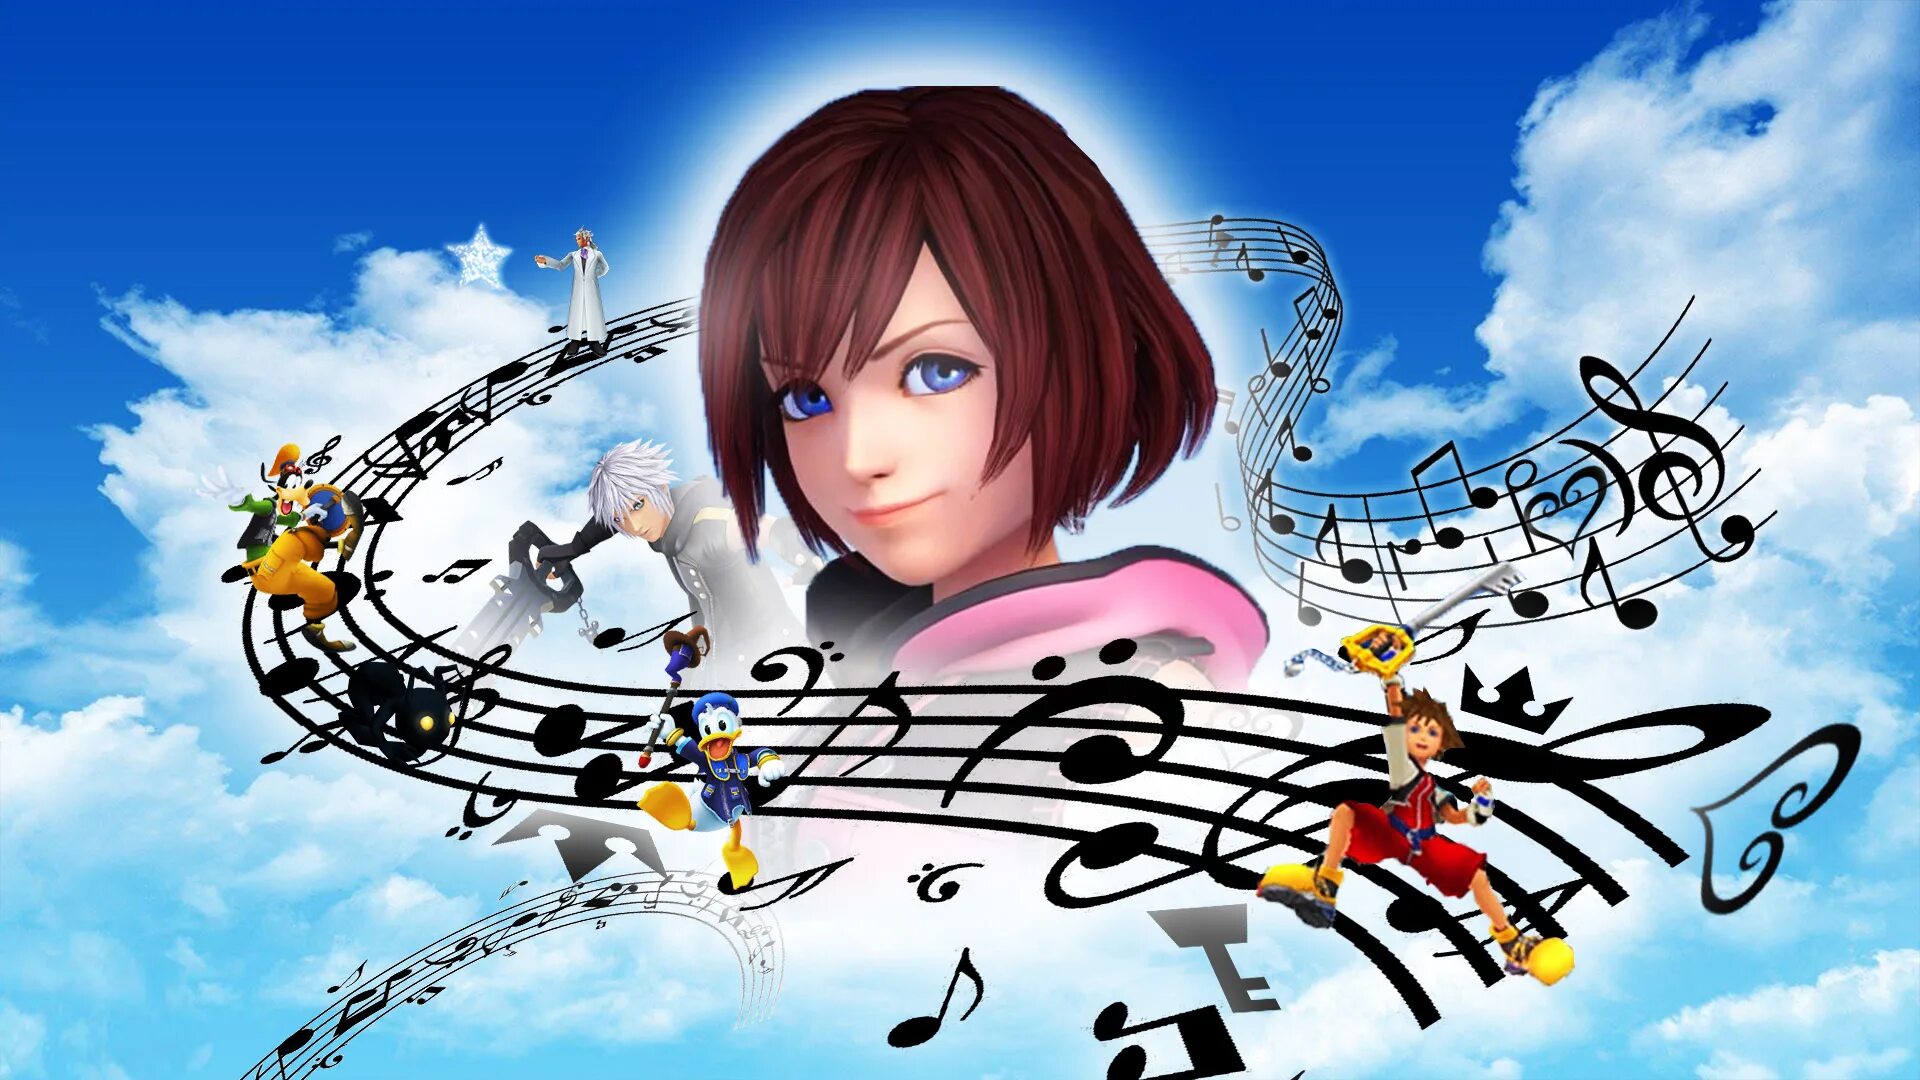 Kingdom Hearts: Melody of Memory. Ритм игры. Ритм игры Melody. Kingdom Hearts Rhythm game. Heart of memories